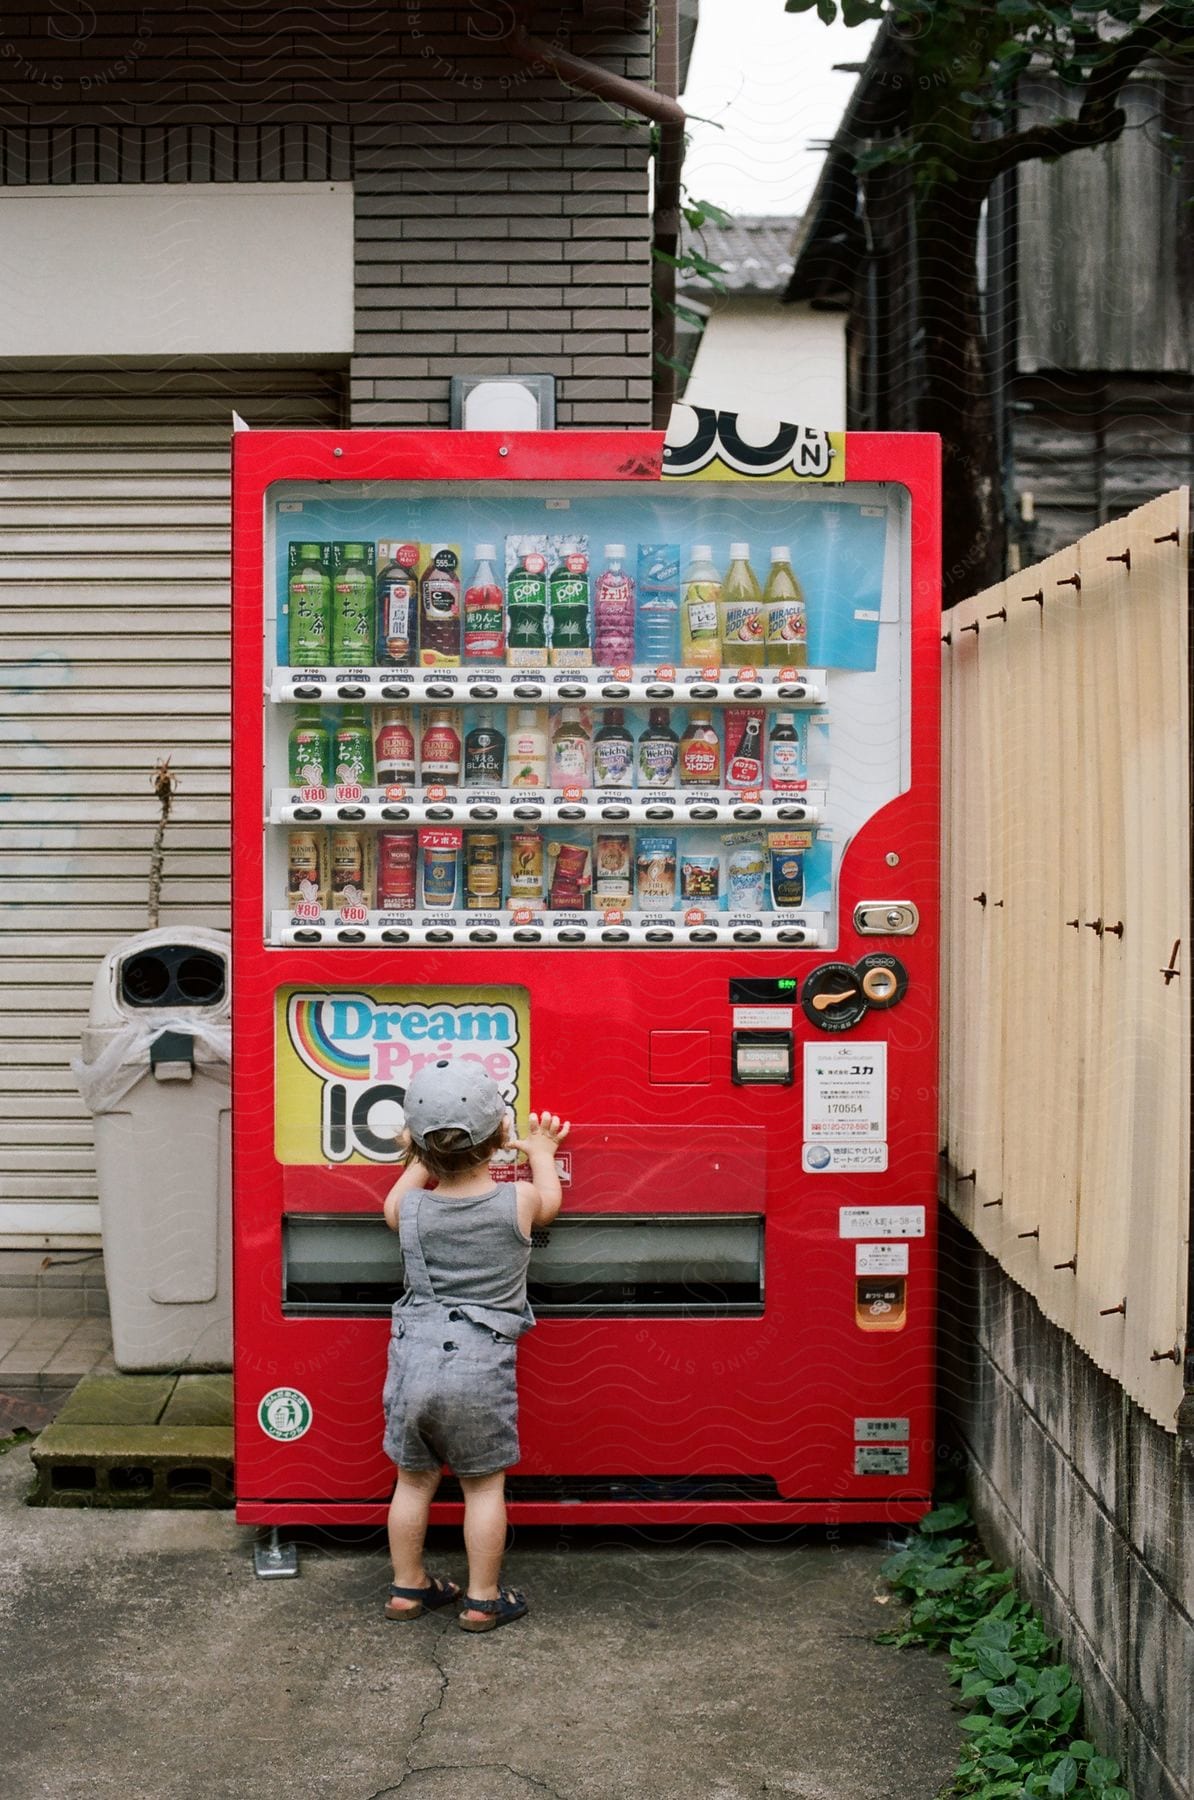 A baby reaching for a drinks vending machine.